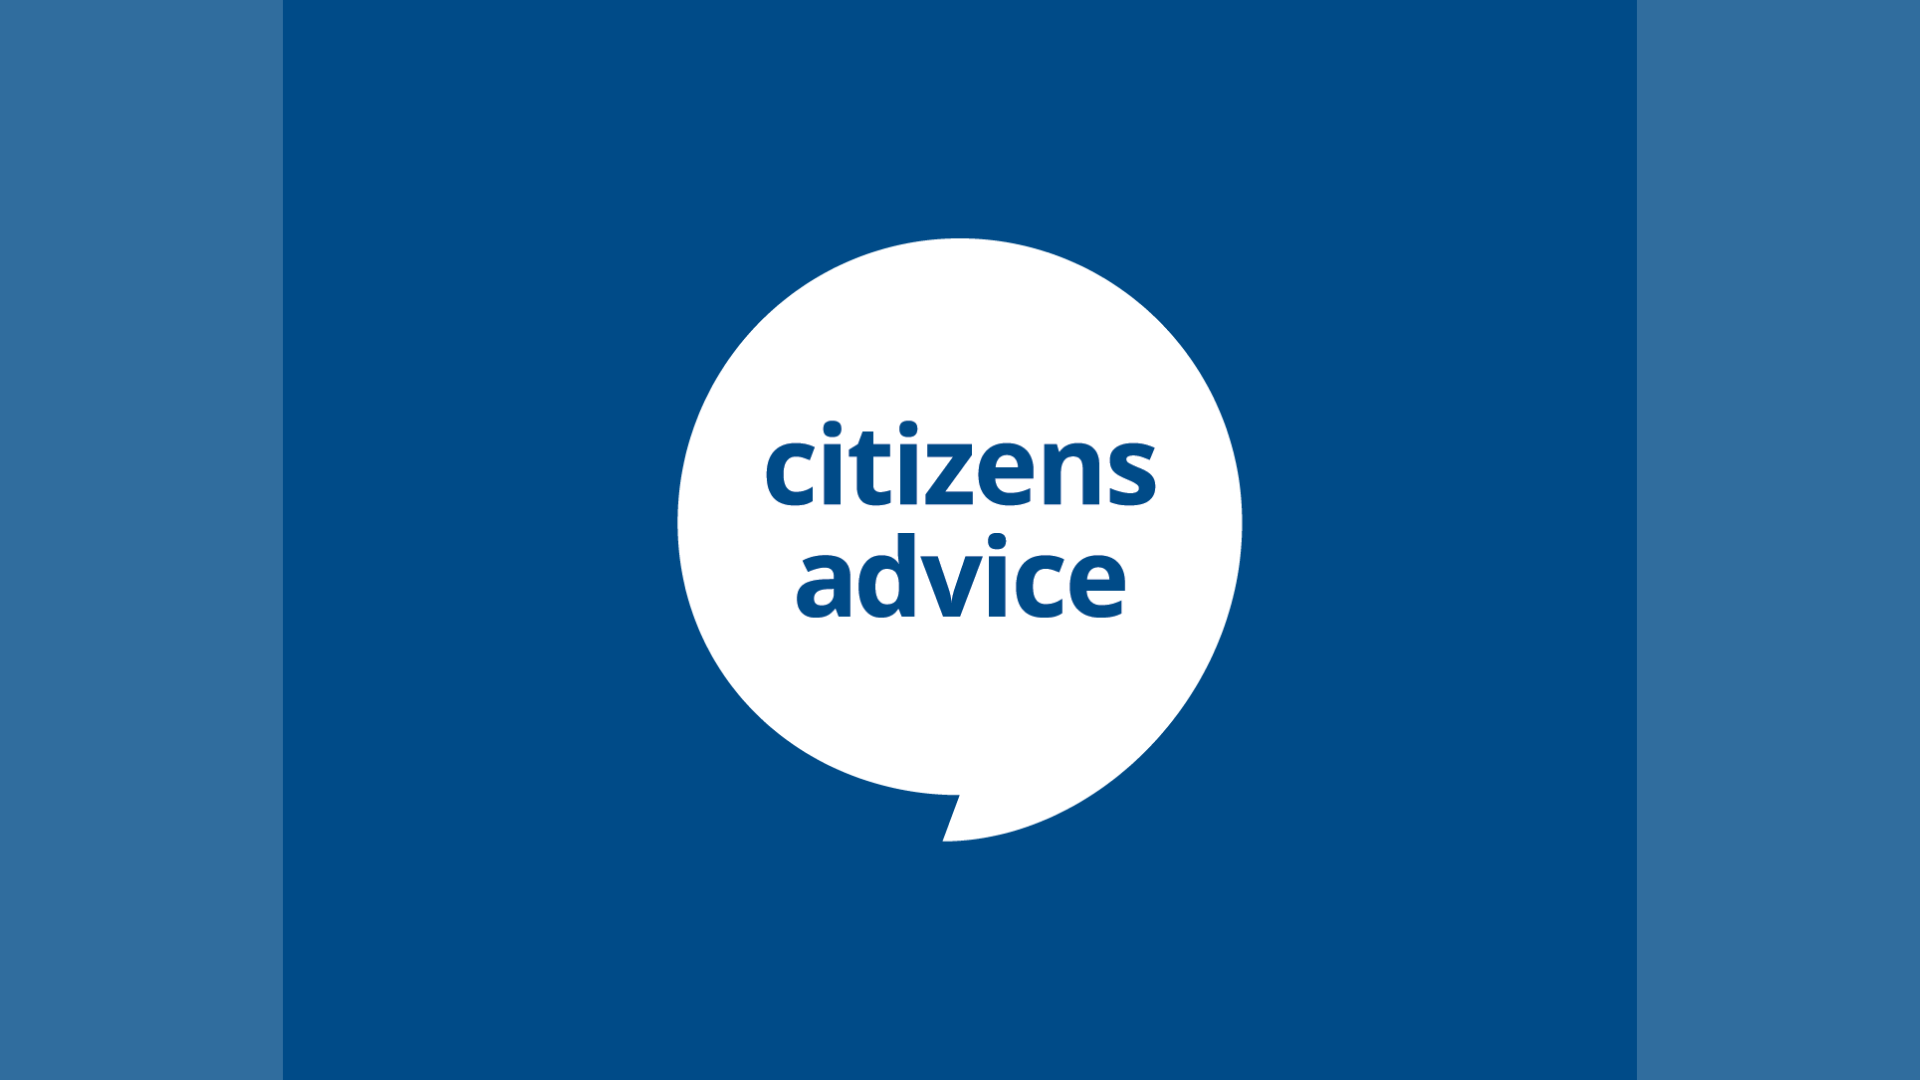 Communications officer for Citizens Advice SORT Group